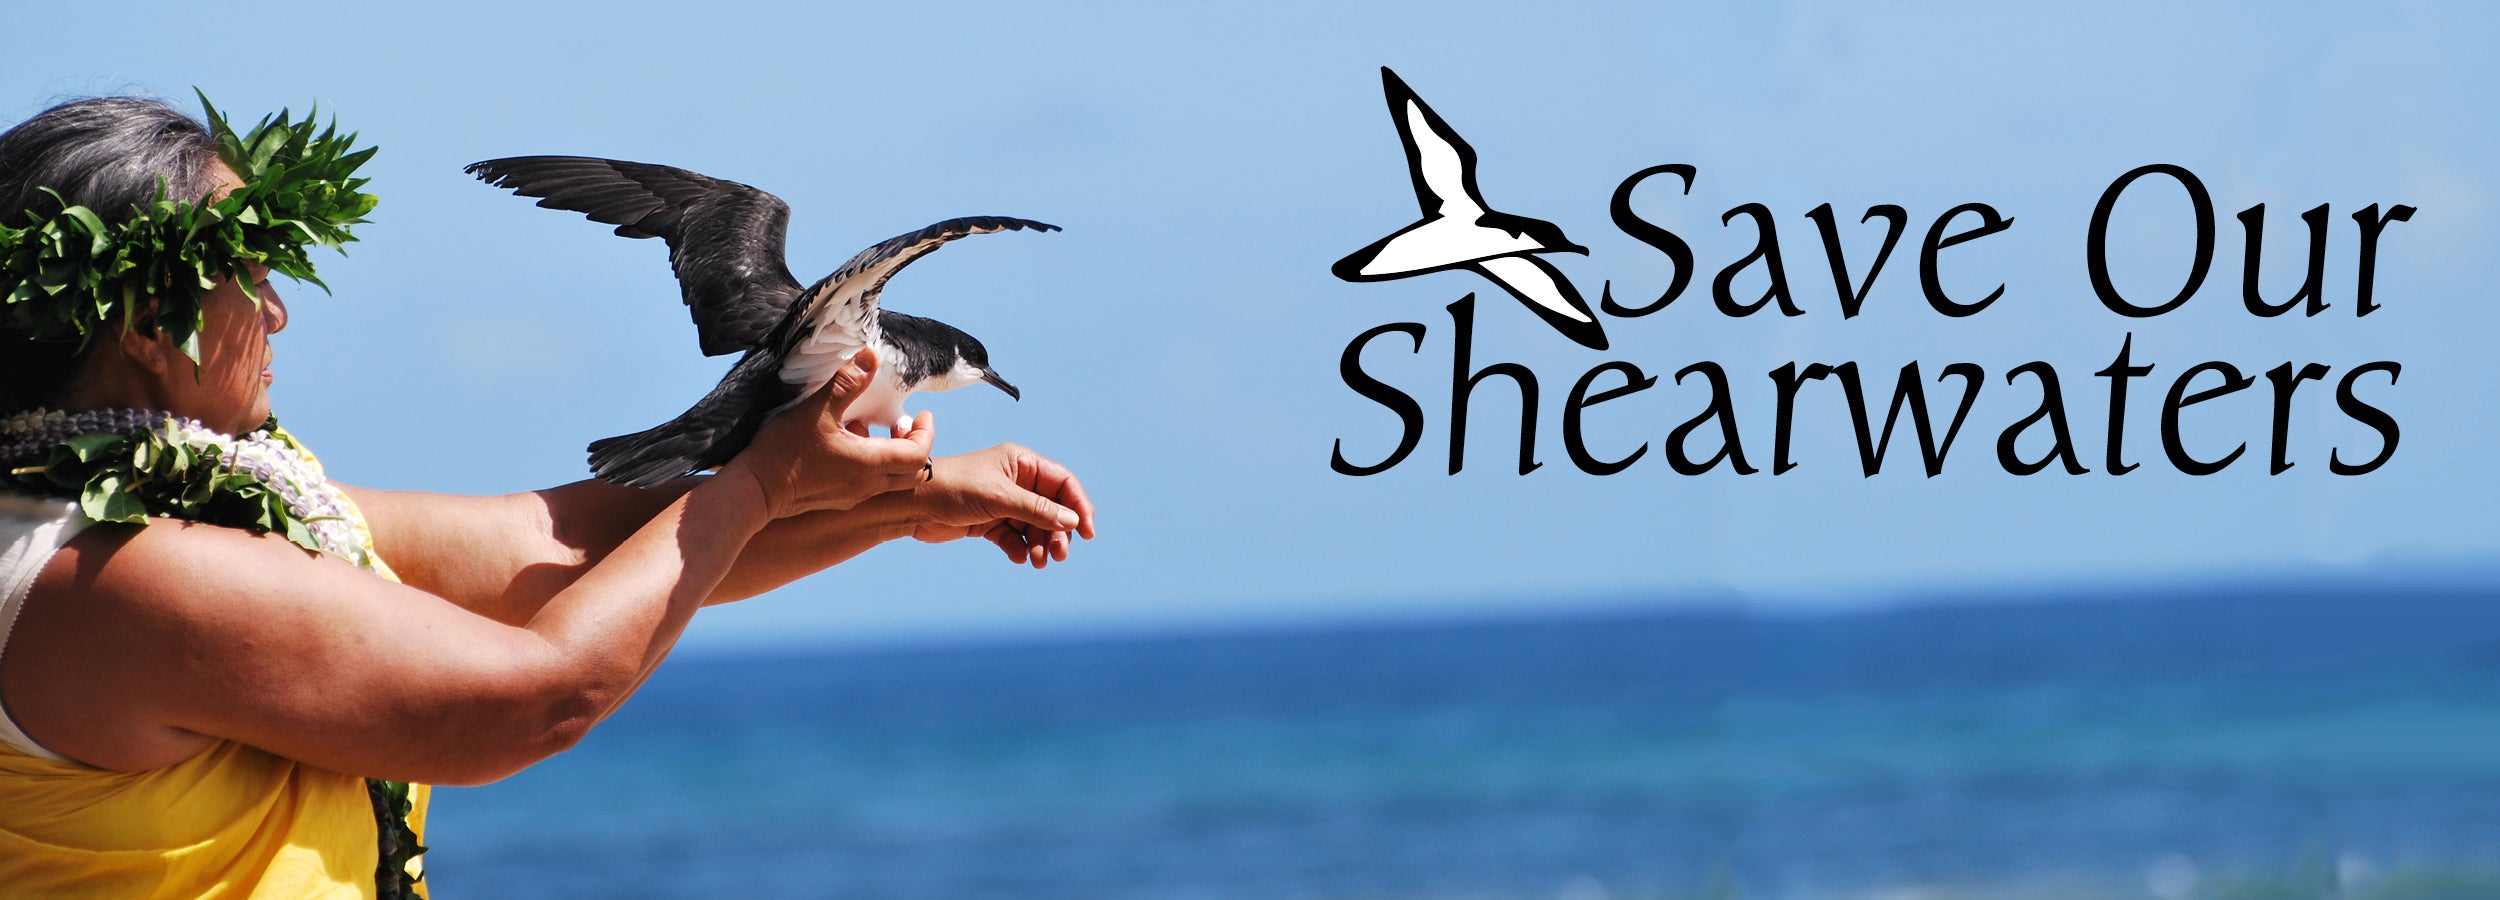 Save Our Shearwaters